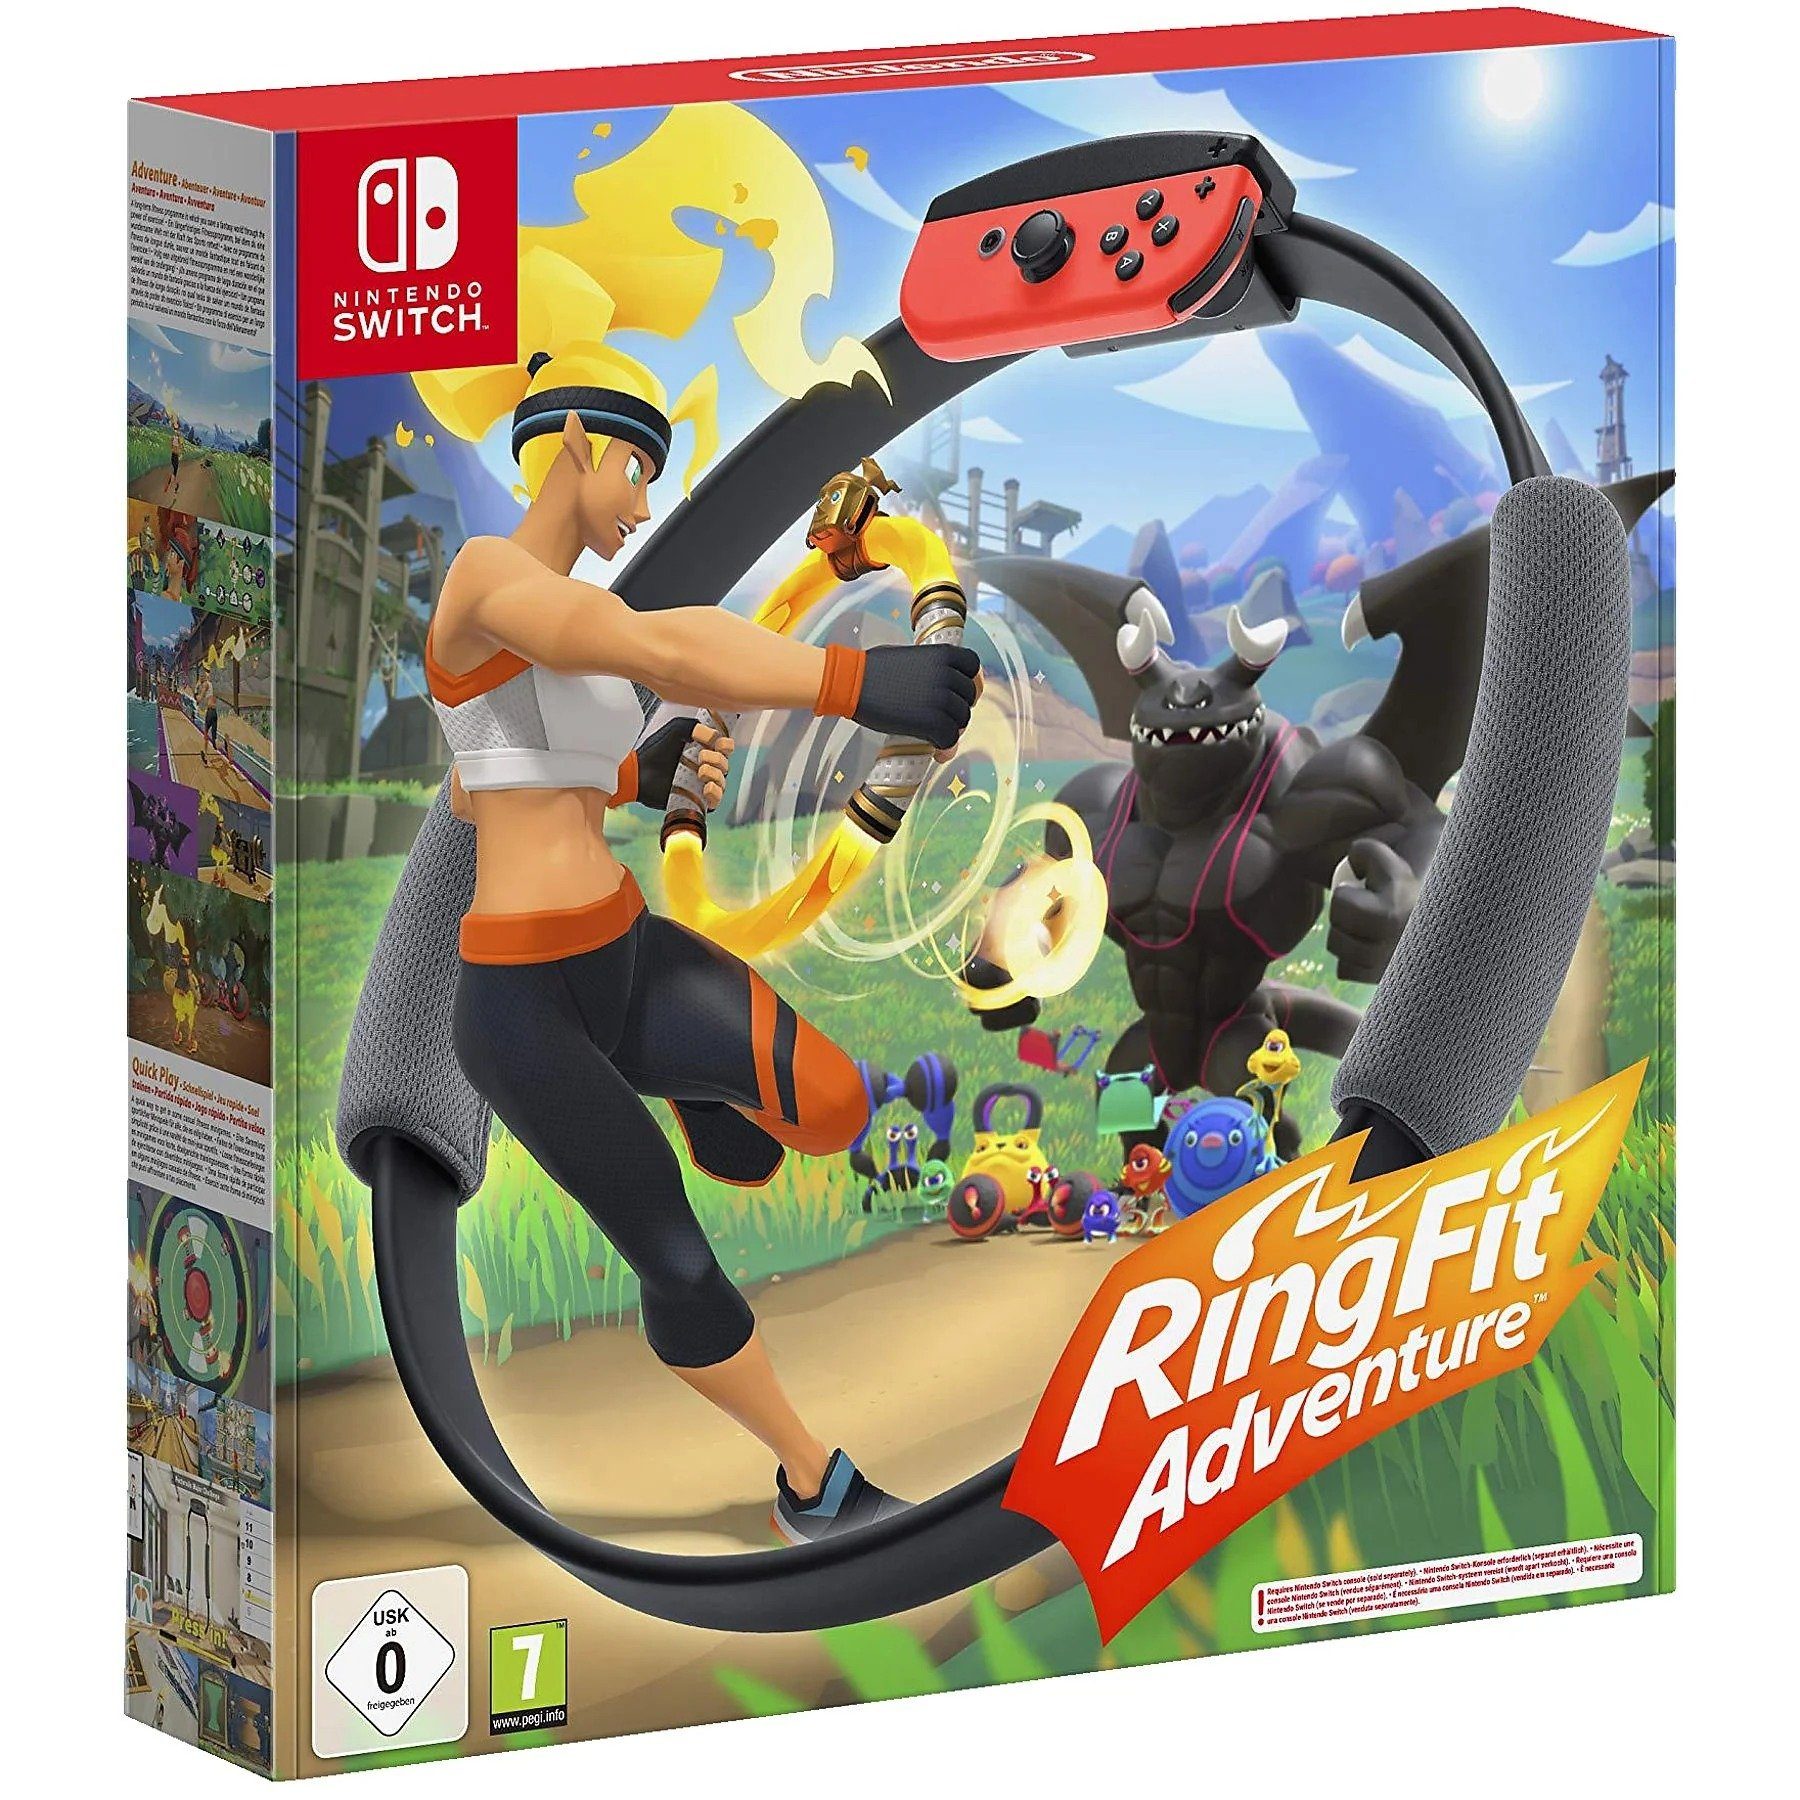 Adventure & Ring inkl. Spiel. Switch-Controller Fit Switch Beingurt Nintendo Ring-Con